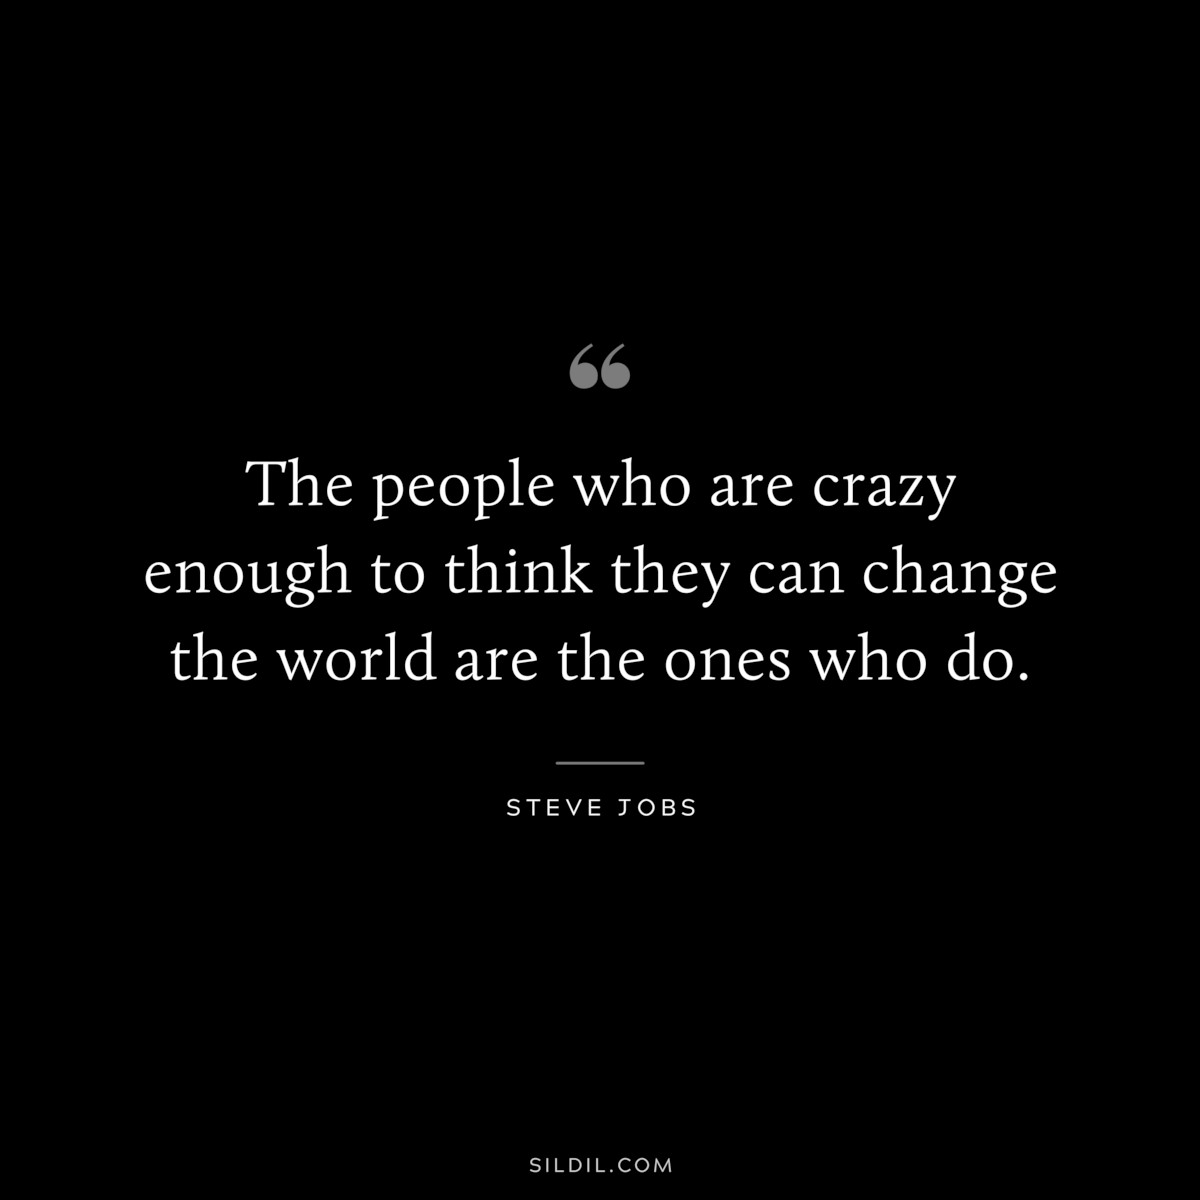 The people who are crazy enough to think they can change the world are the ones who do. ― Steve Jobs